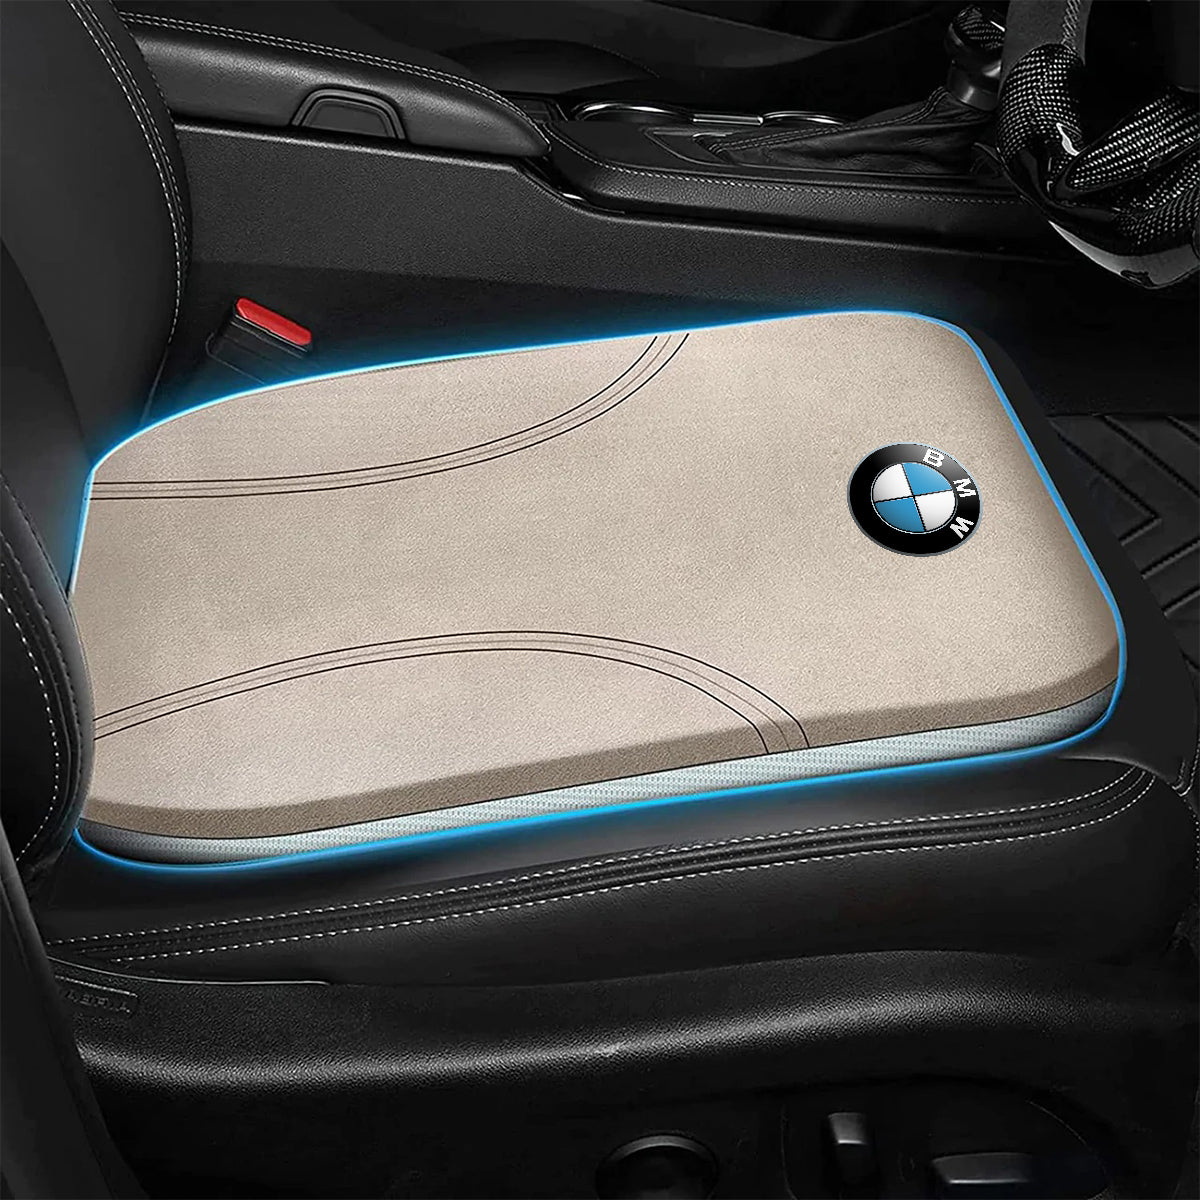 Seat cushion solution for back/hip pain - BMW 3-Series and 4